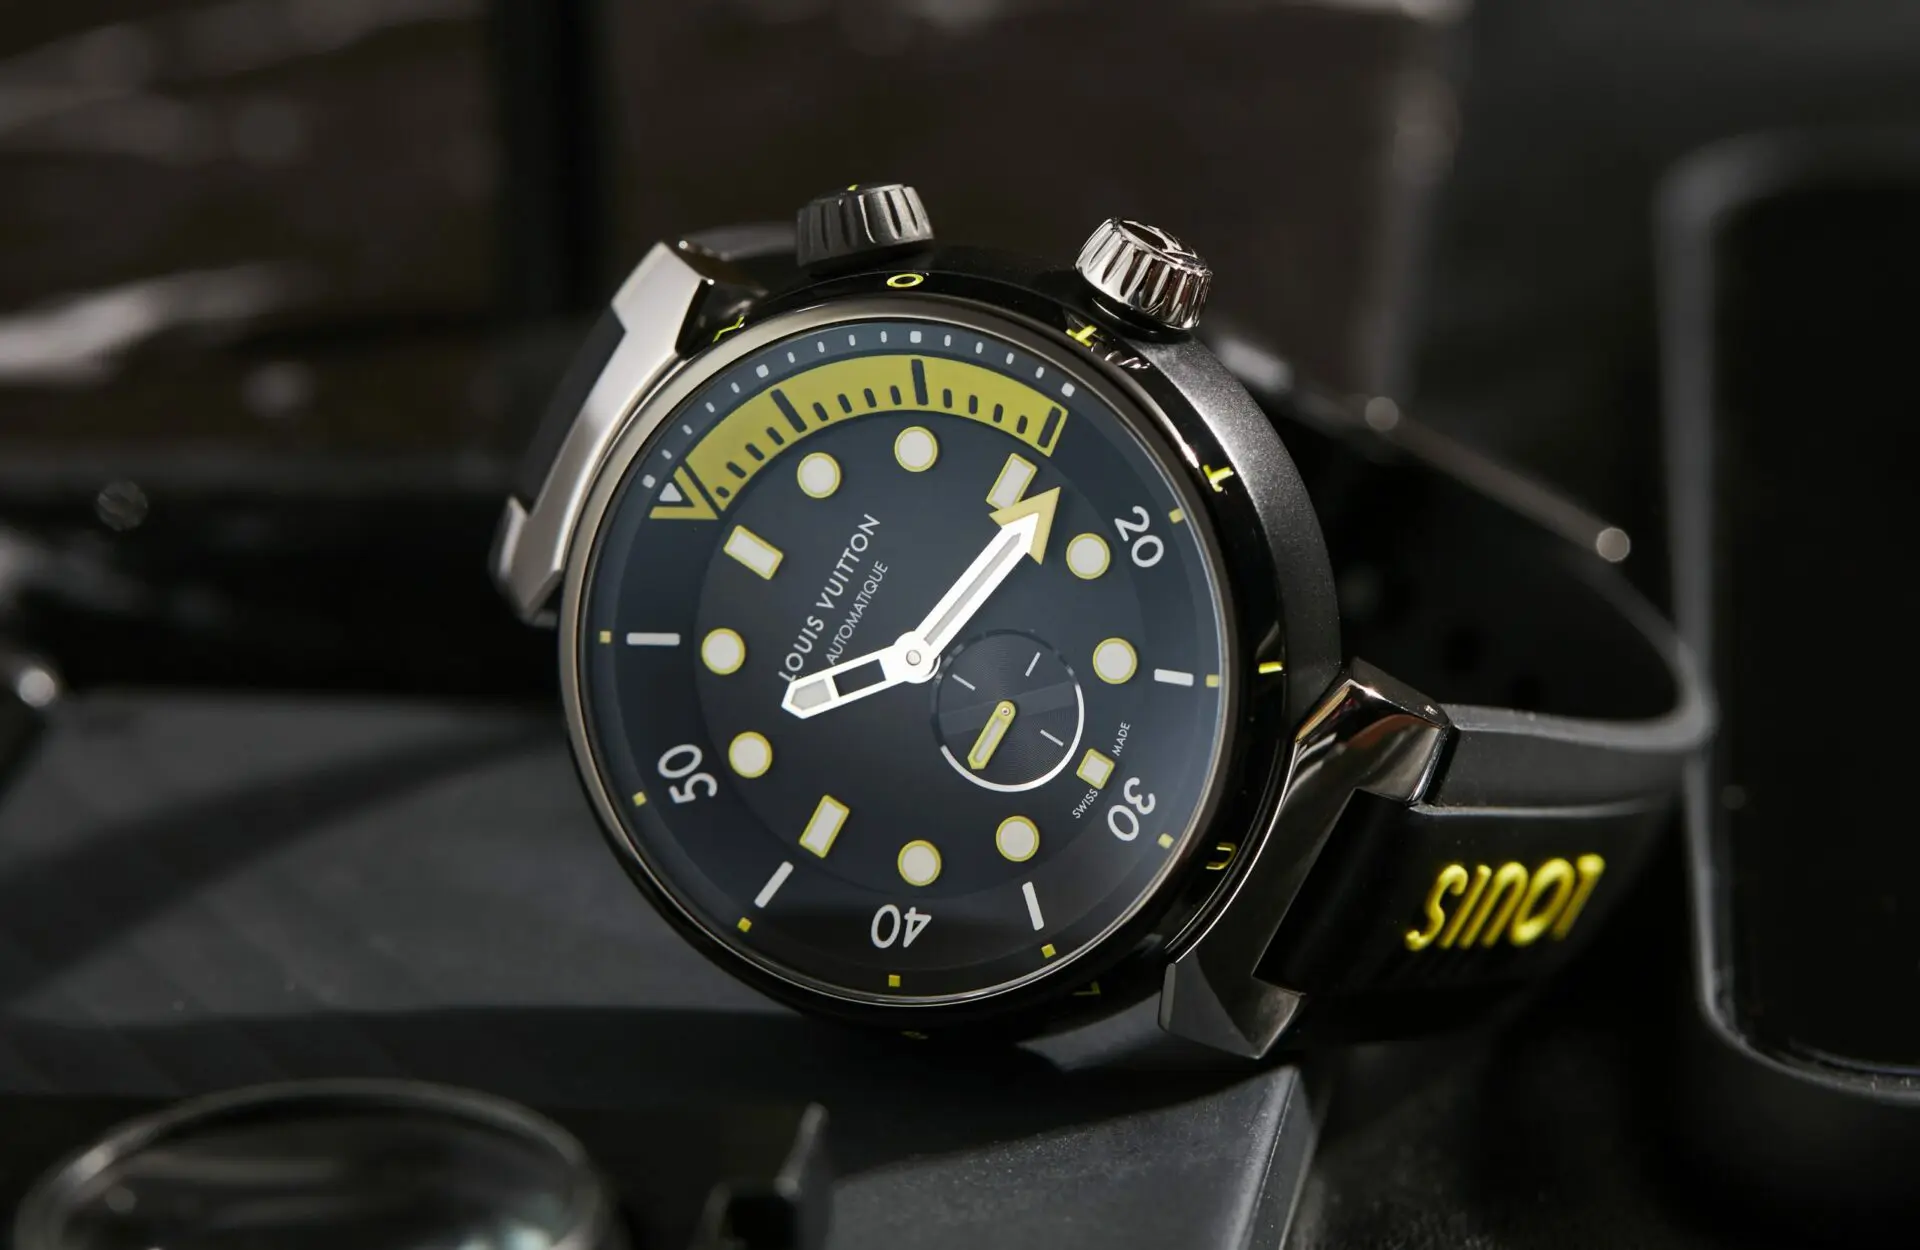 Louis Vuitton: Tambour Street Diver: Two New Looks For The Sporty